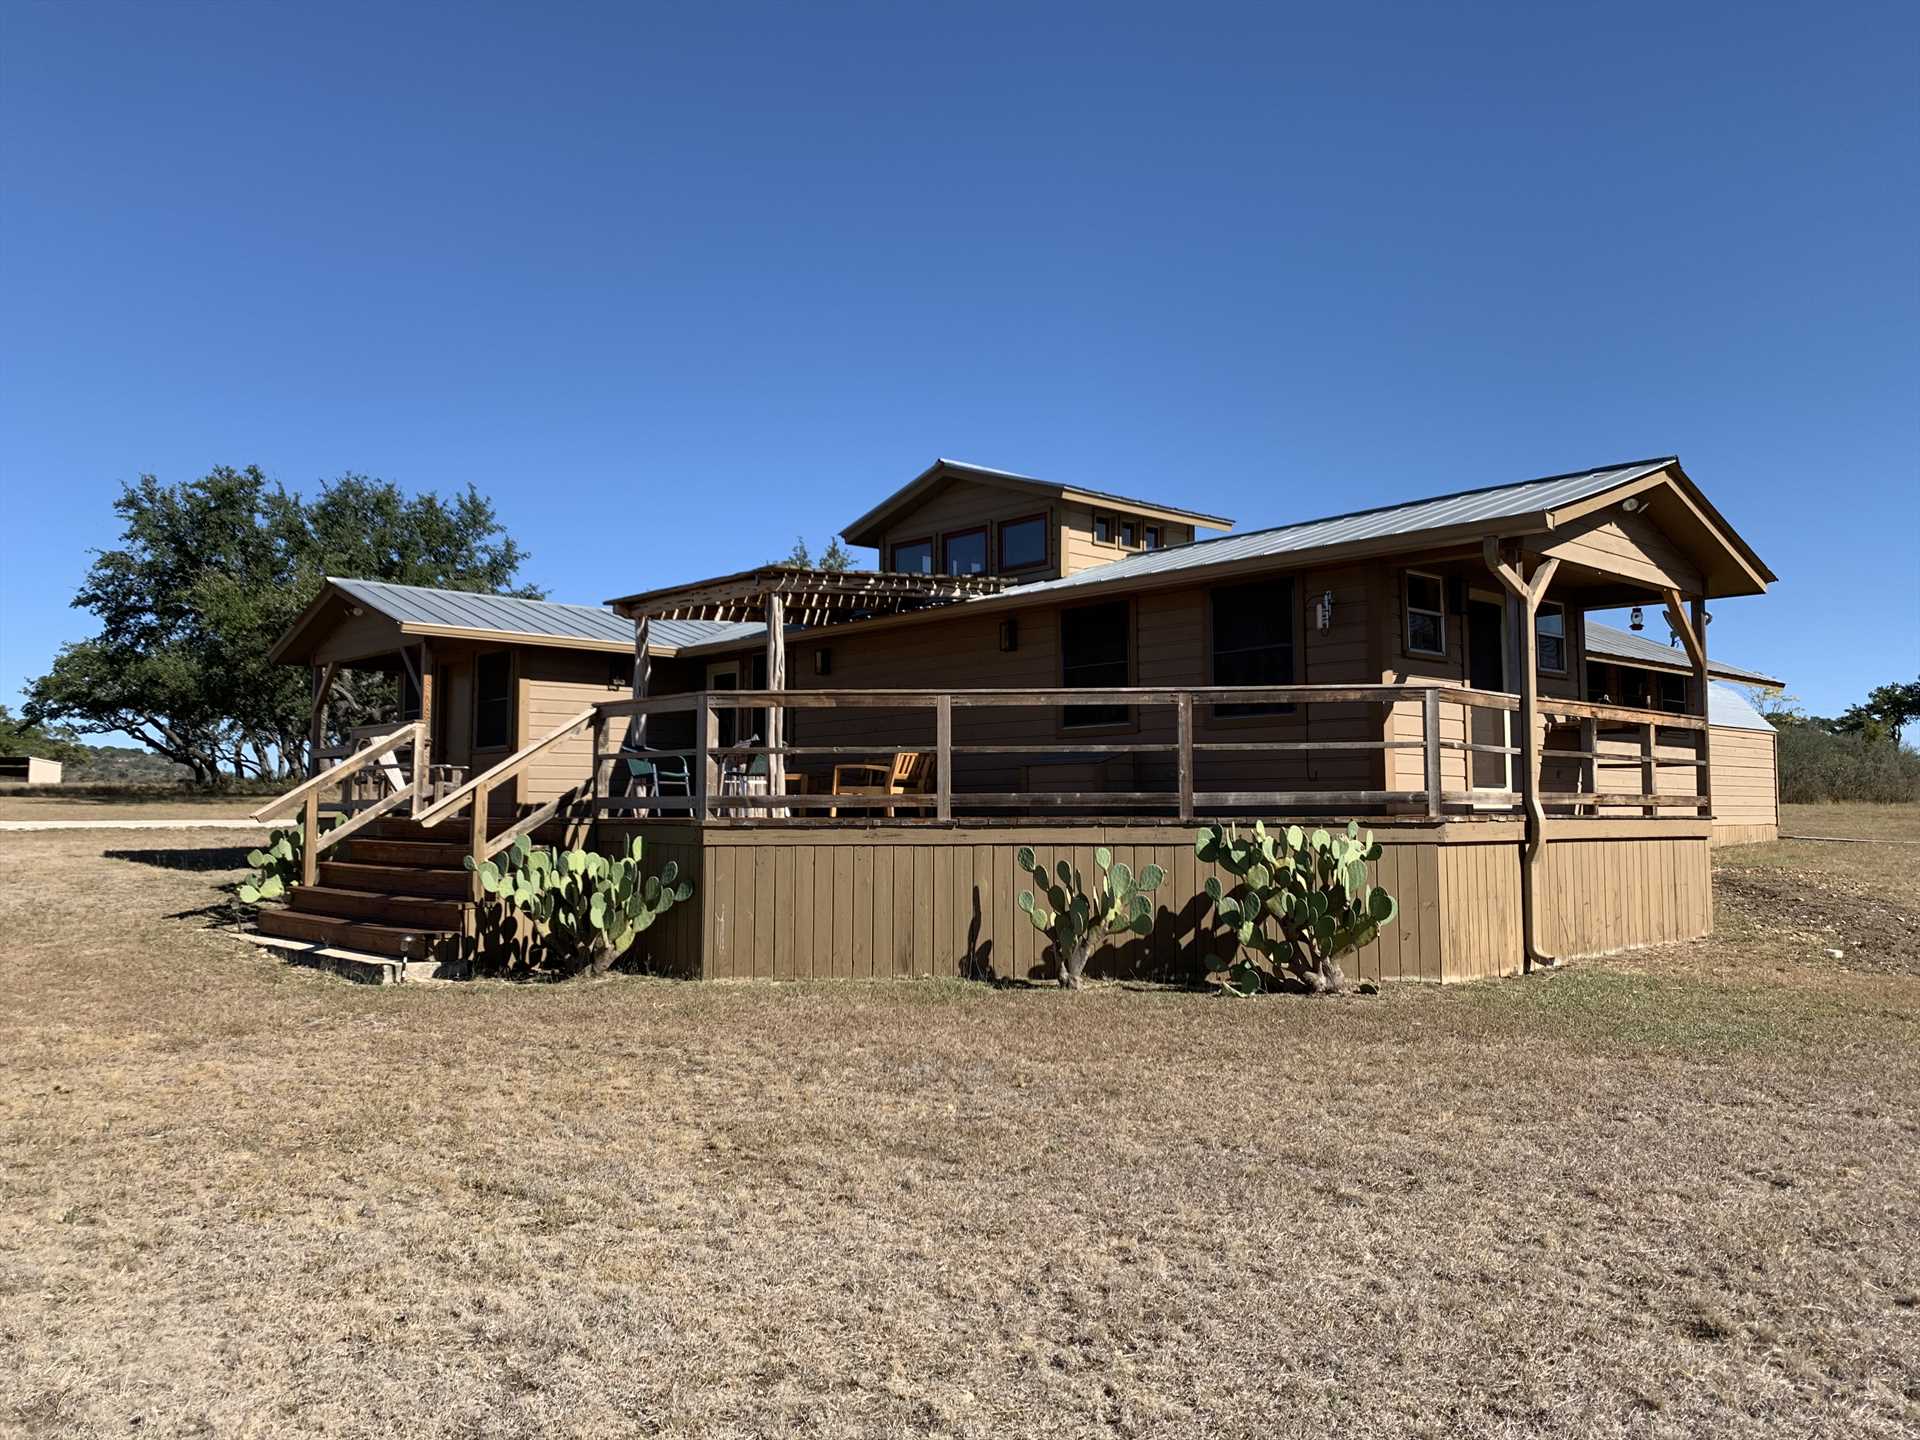                                                 The Antler Cabin at Tabasco Ranch provides a peaceful and romantic Hill Country escape!